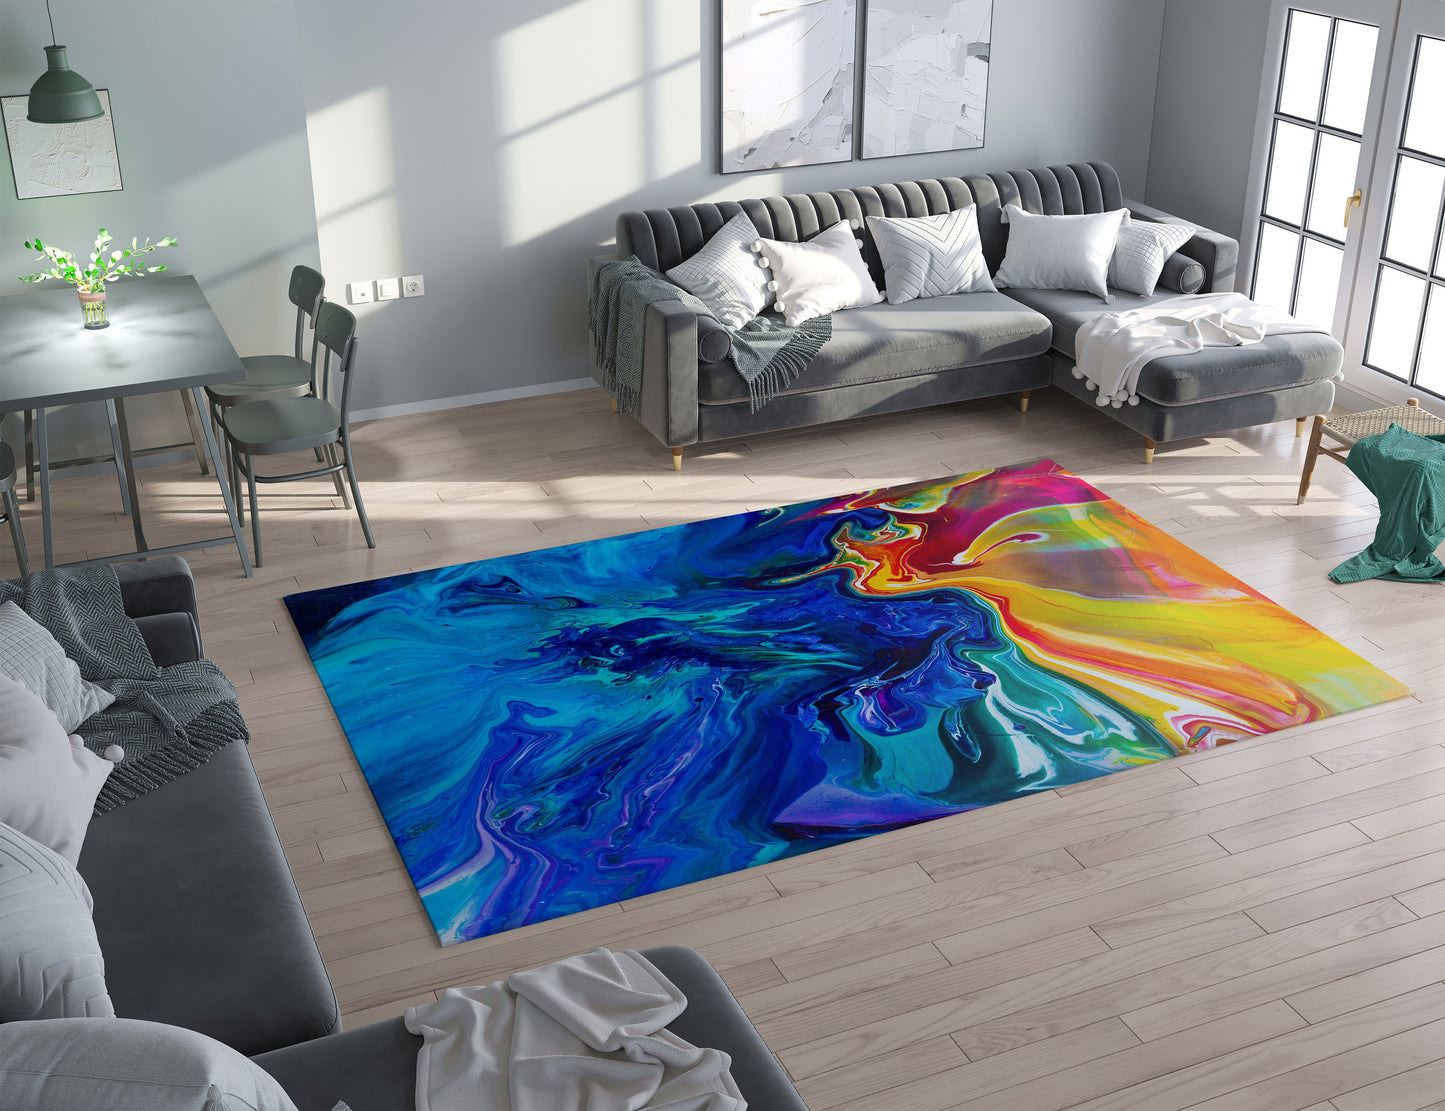 Abstract Art Rug Blue yellow Rugs water ocean decor unique Rugs 2x3 3x5 4x6 5x7 8x10 Large rug colorful bright floormat